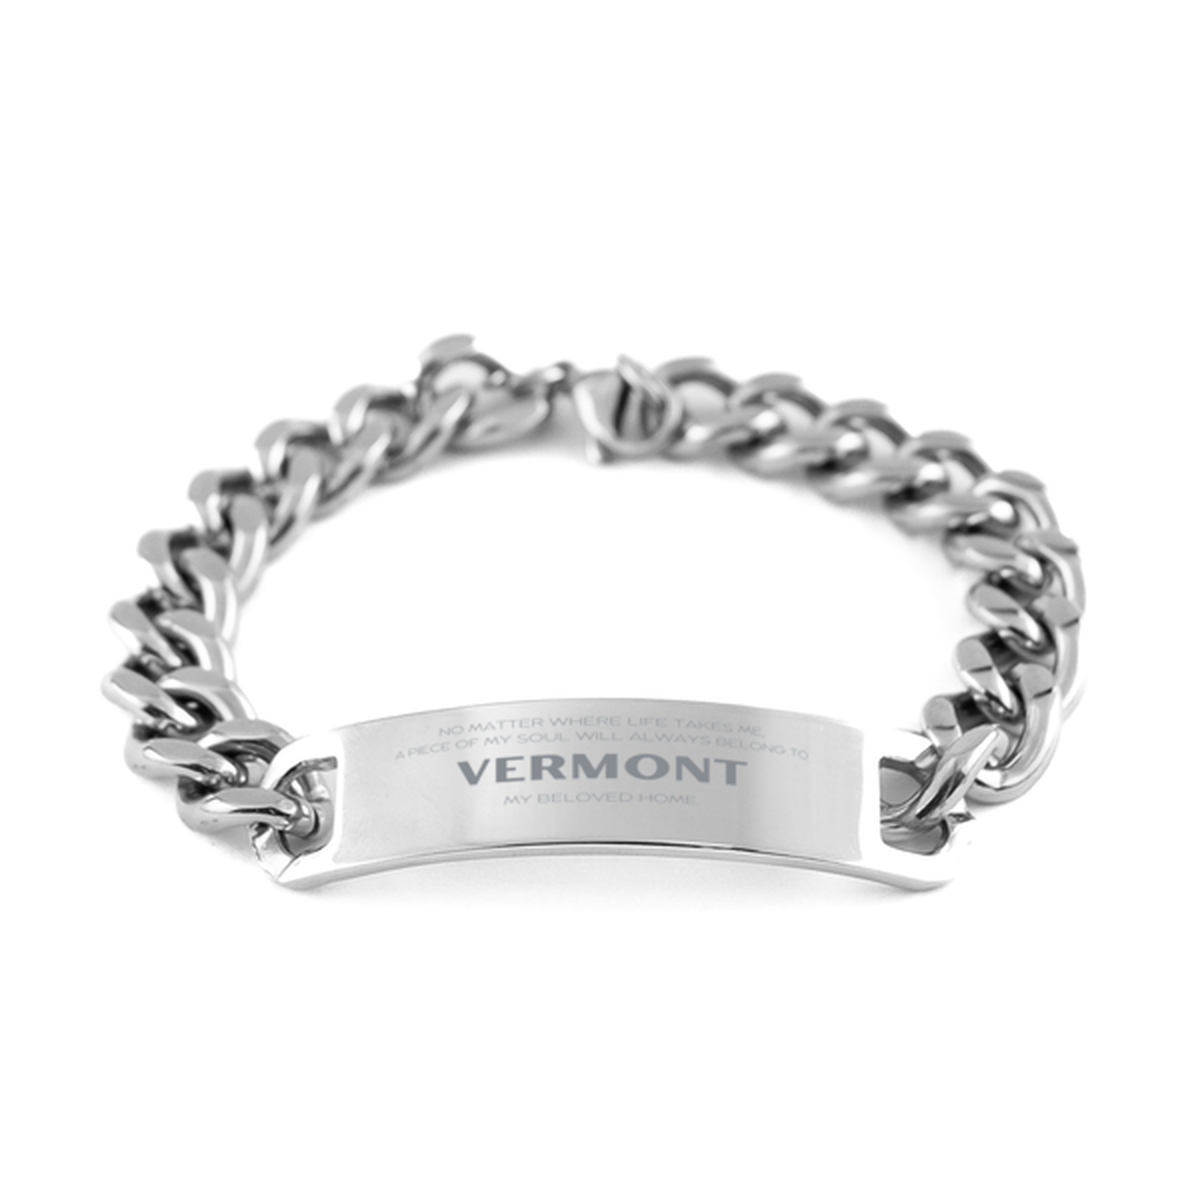 Love Vermont State Gifts, My soul will always belong to Vermont, Proud Cuban Chain Stainless Steel Bracelet, Birthday Unique Gifts For Vermont Men, Women, Friends